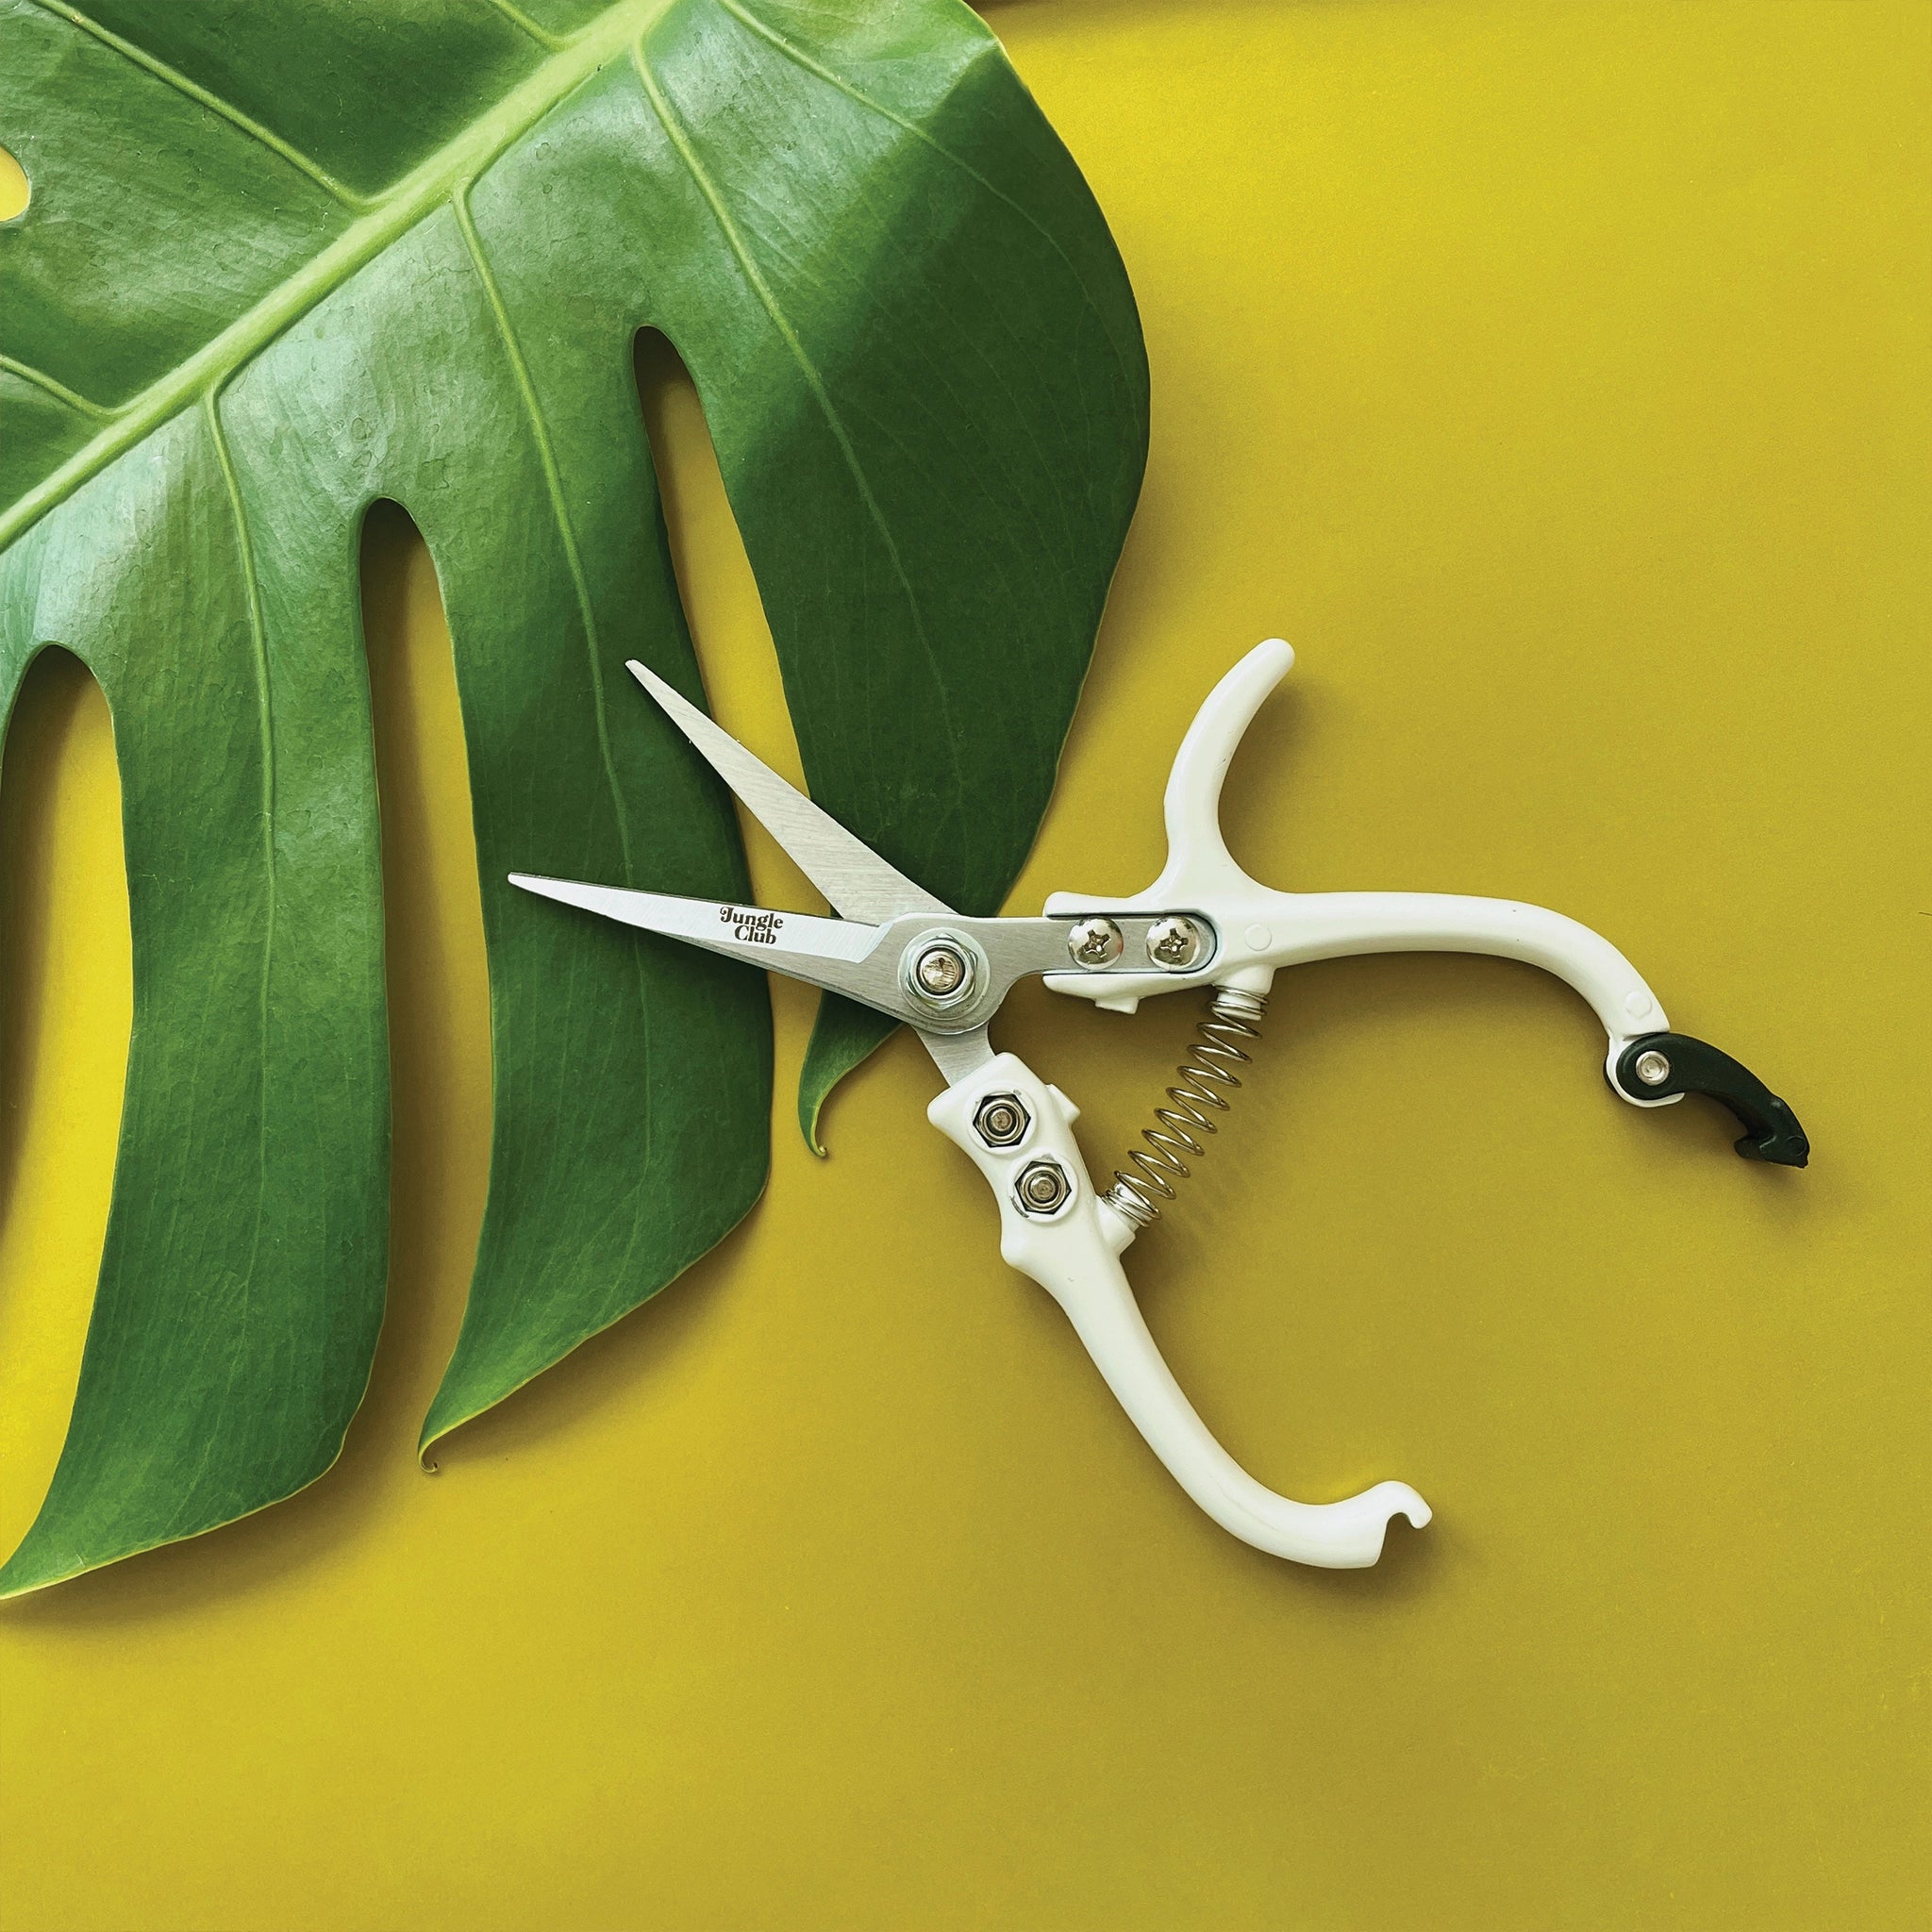 Pair of pruning shears with white handles and metal blades. The outer blade reads &#39;jungle club&#39; in small, playful lettering. The pruning shears have a black clasp at the top of the handles to secure them closed.